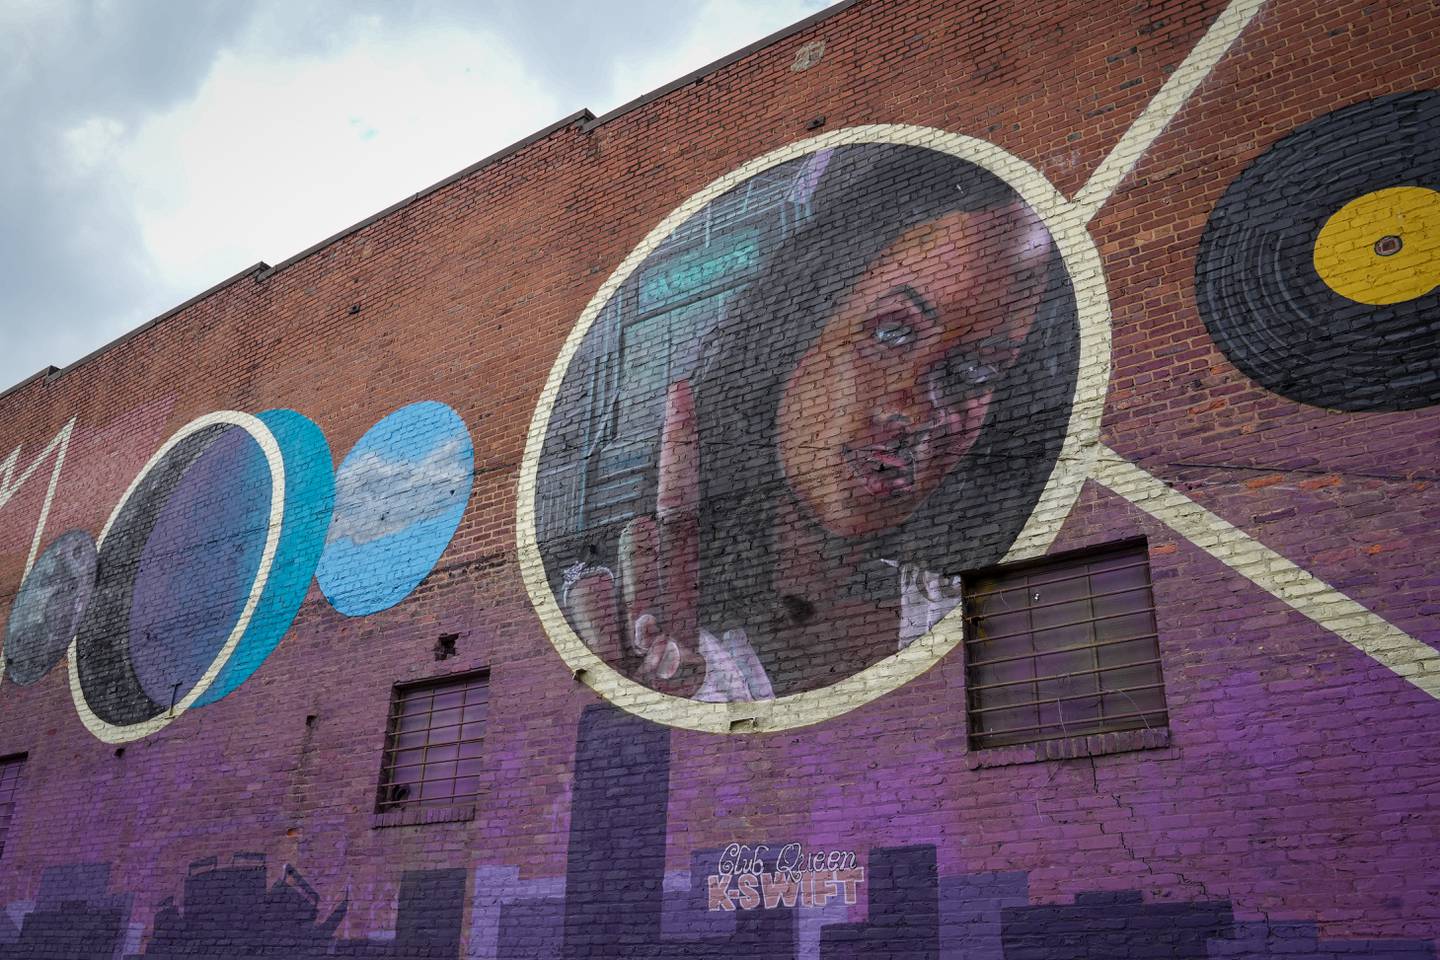 A mural of DJ K-Swift is painted on the wall of Hammerjacks in South Baltimore, painted by artist Nether410.